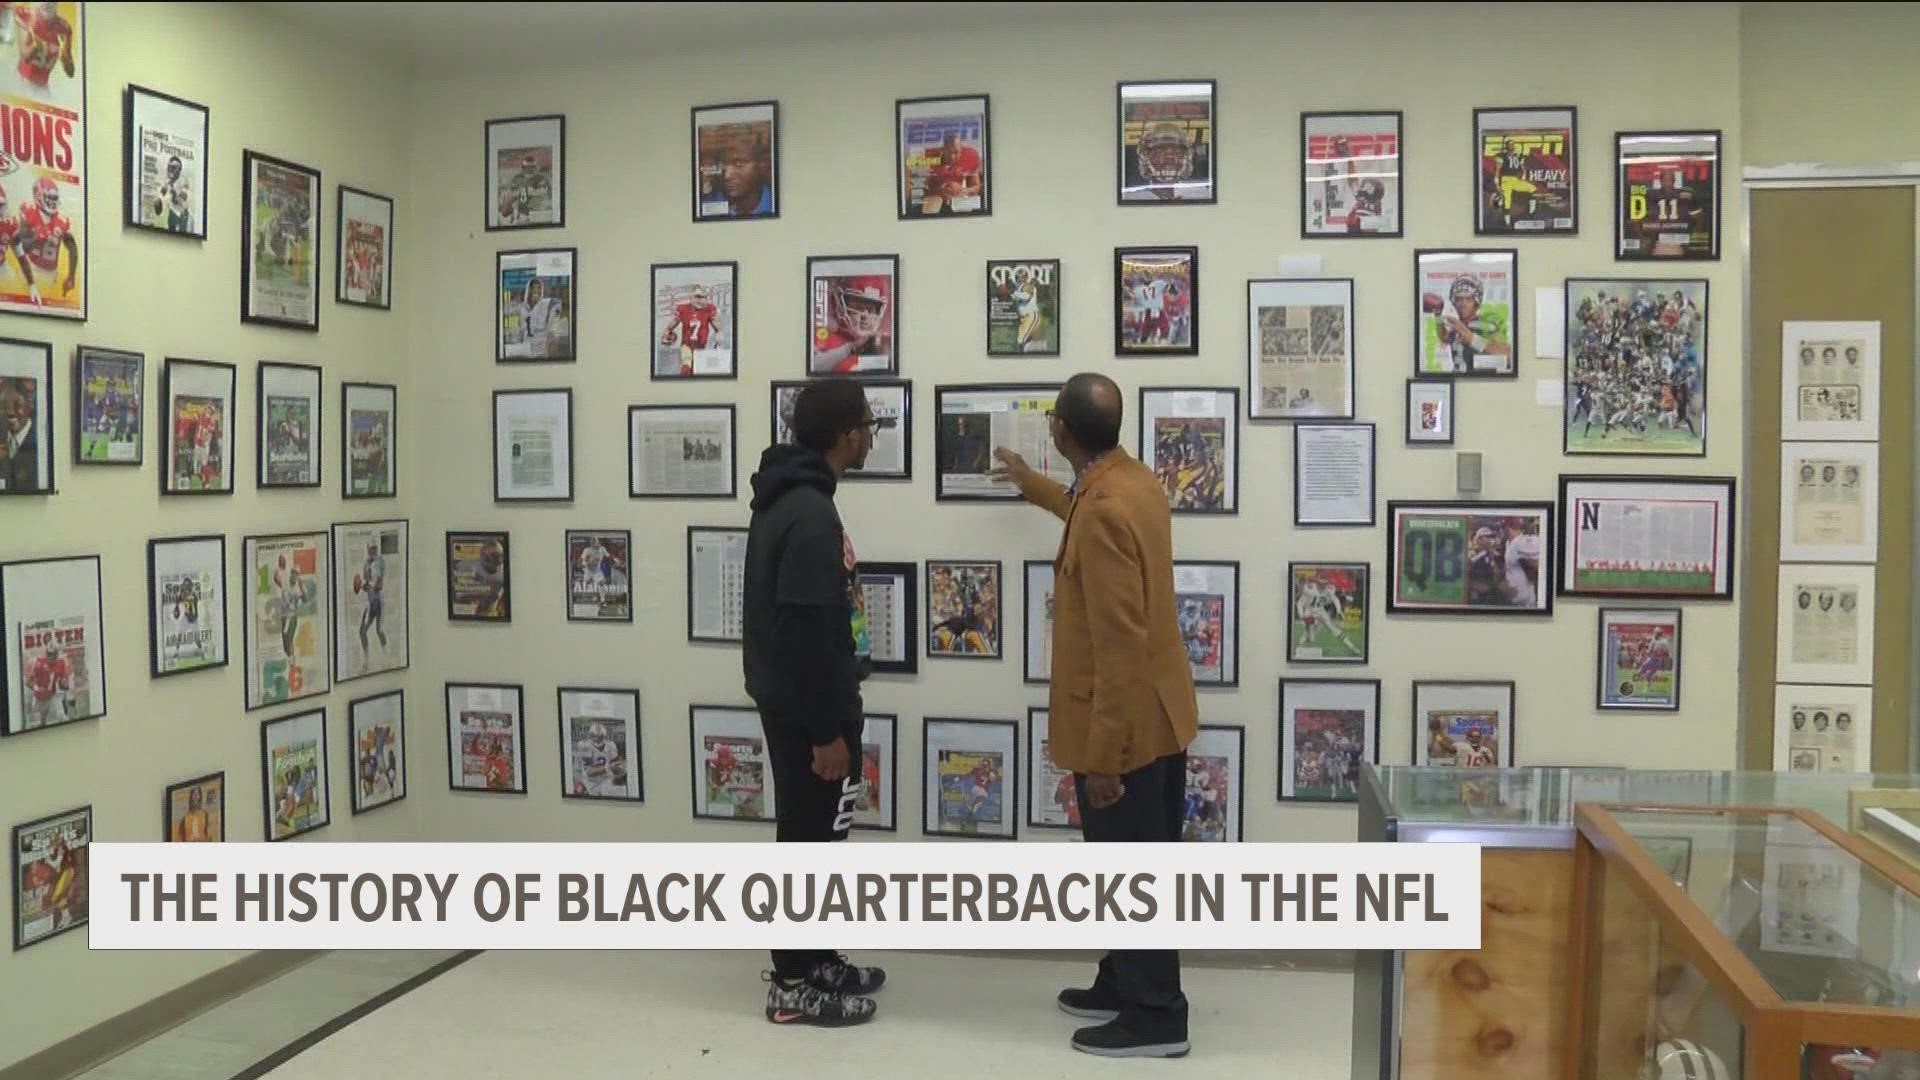 Jarvis Christian University has a museum with an exhibit dedicated to the History of Black Quarterbacks.